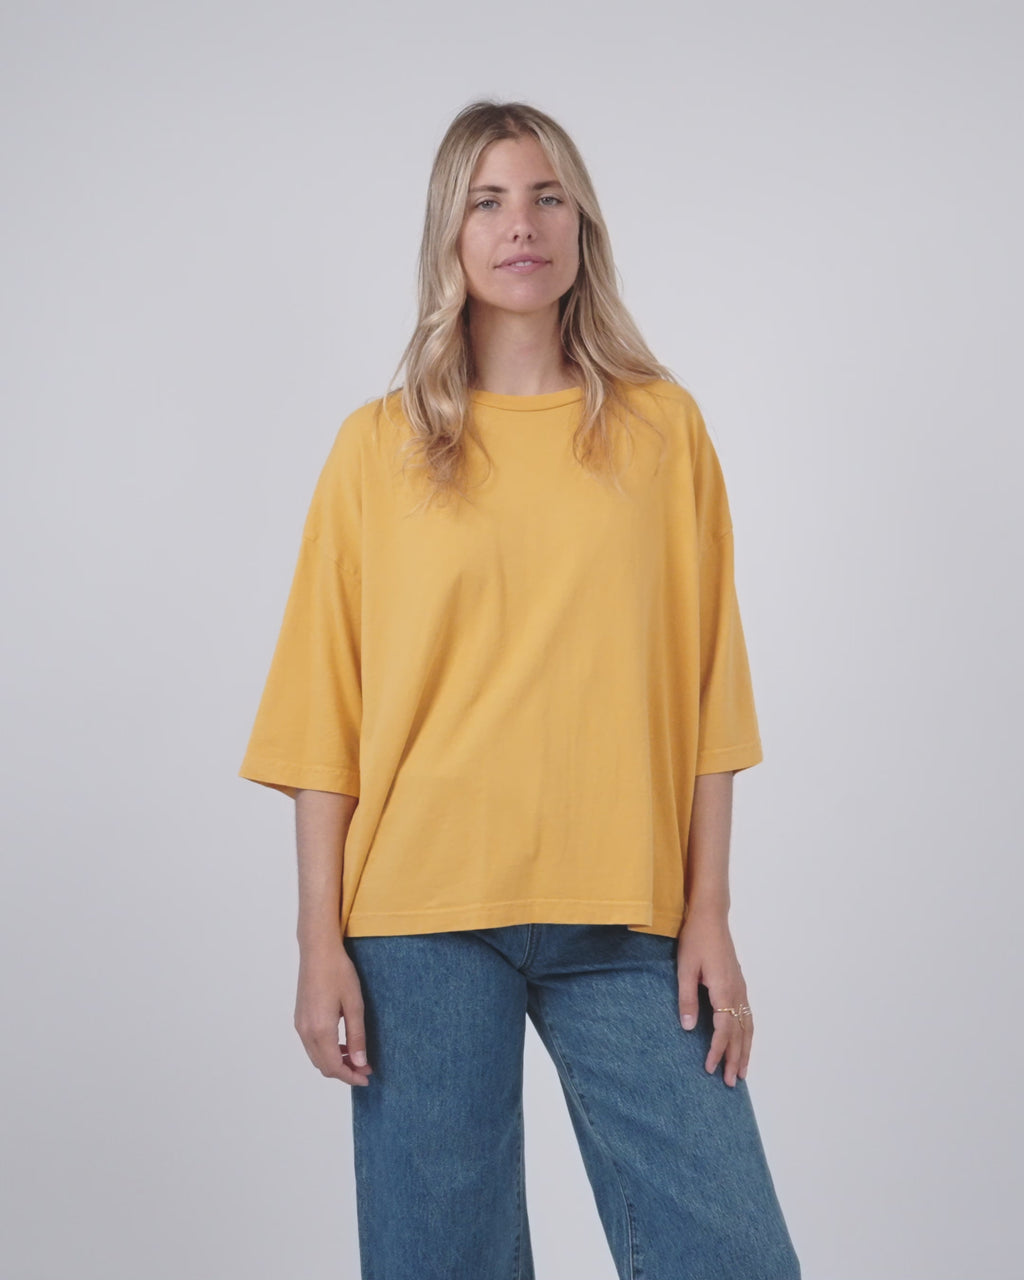 Imperfects - Night Shirt in Squash Blossom - Womens